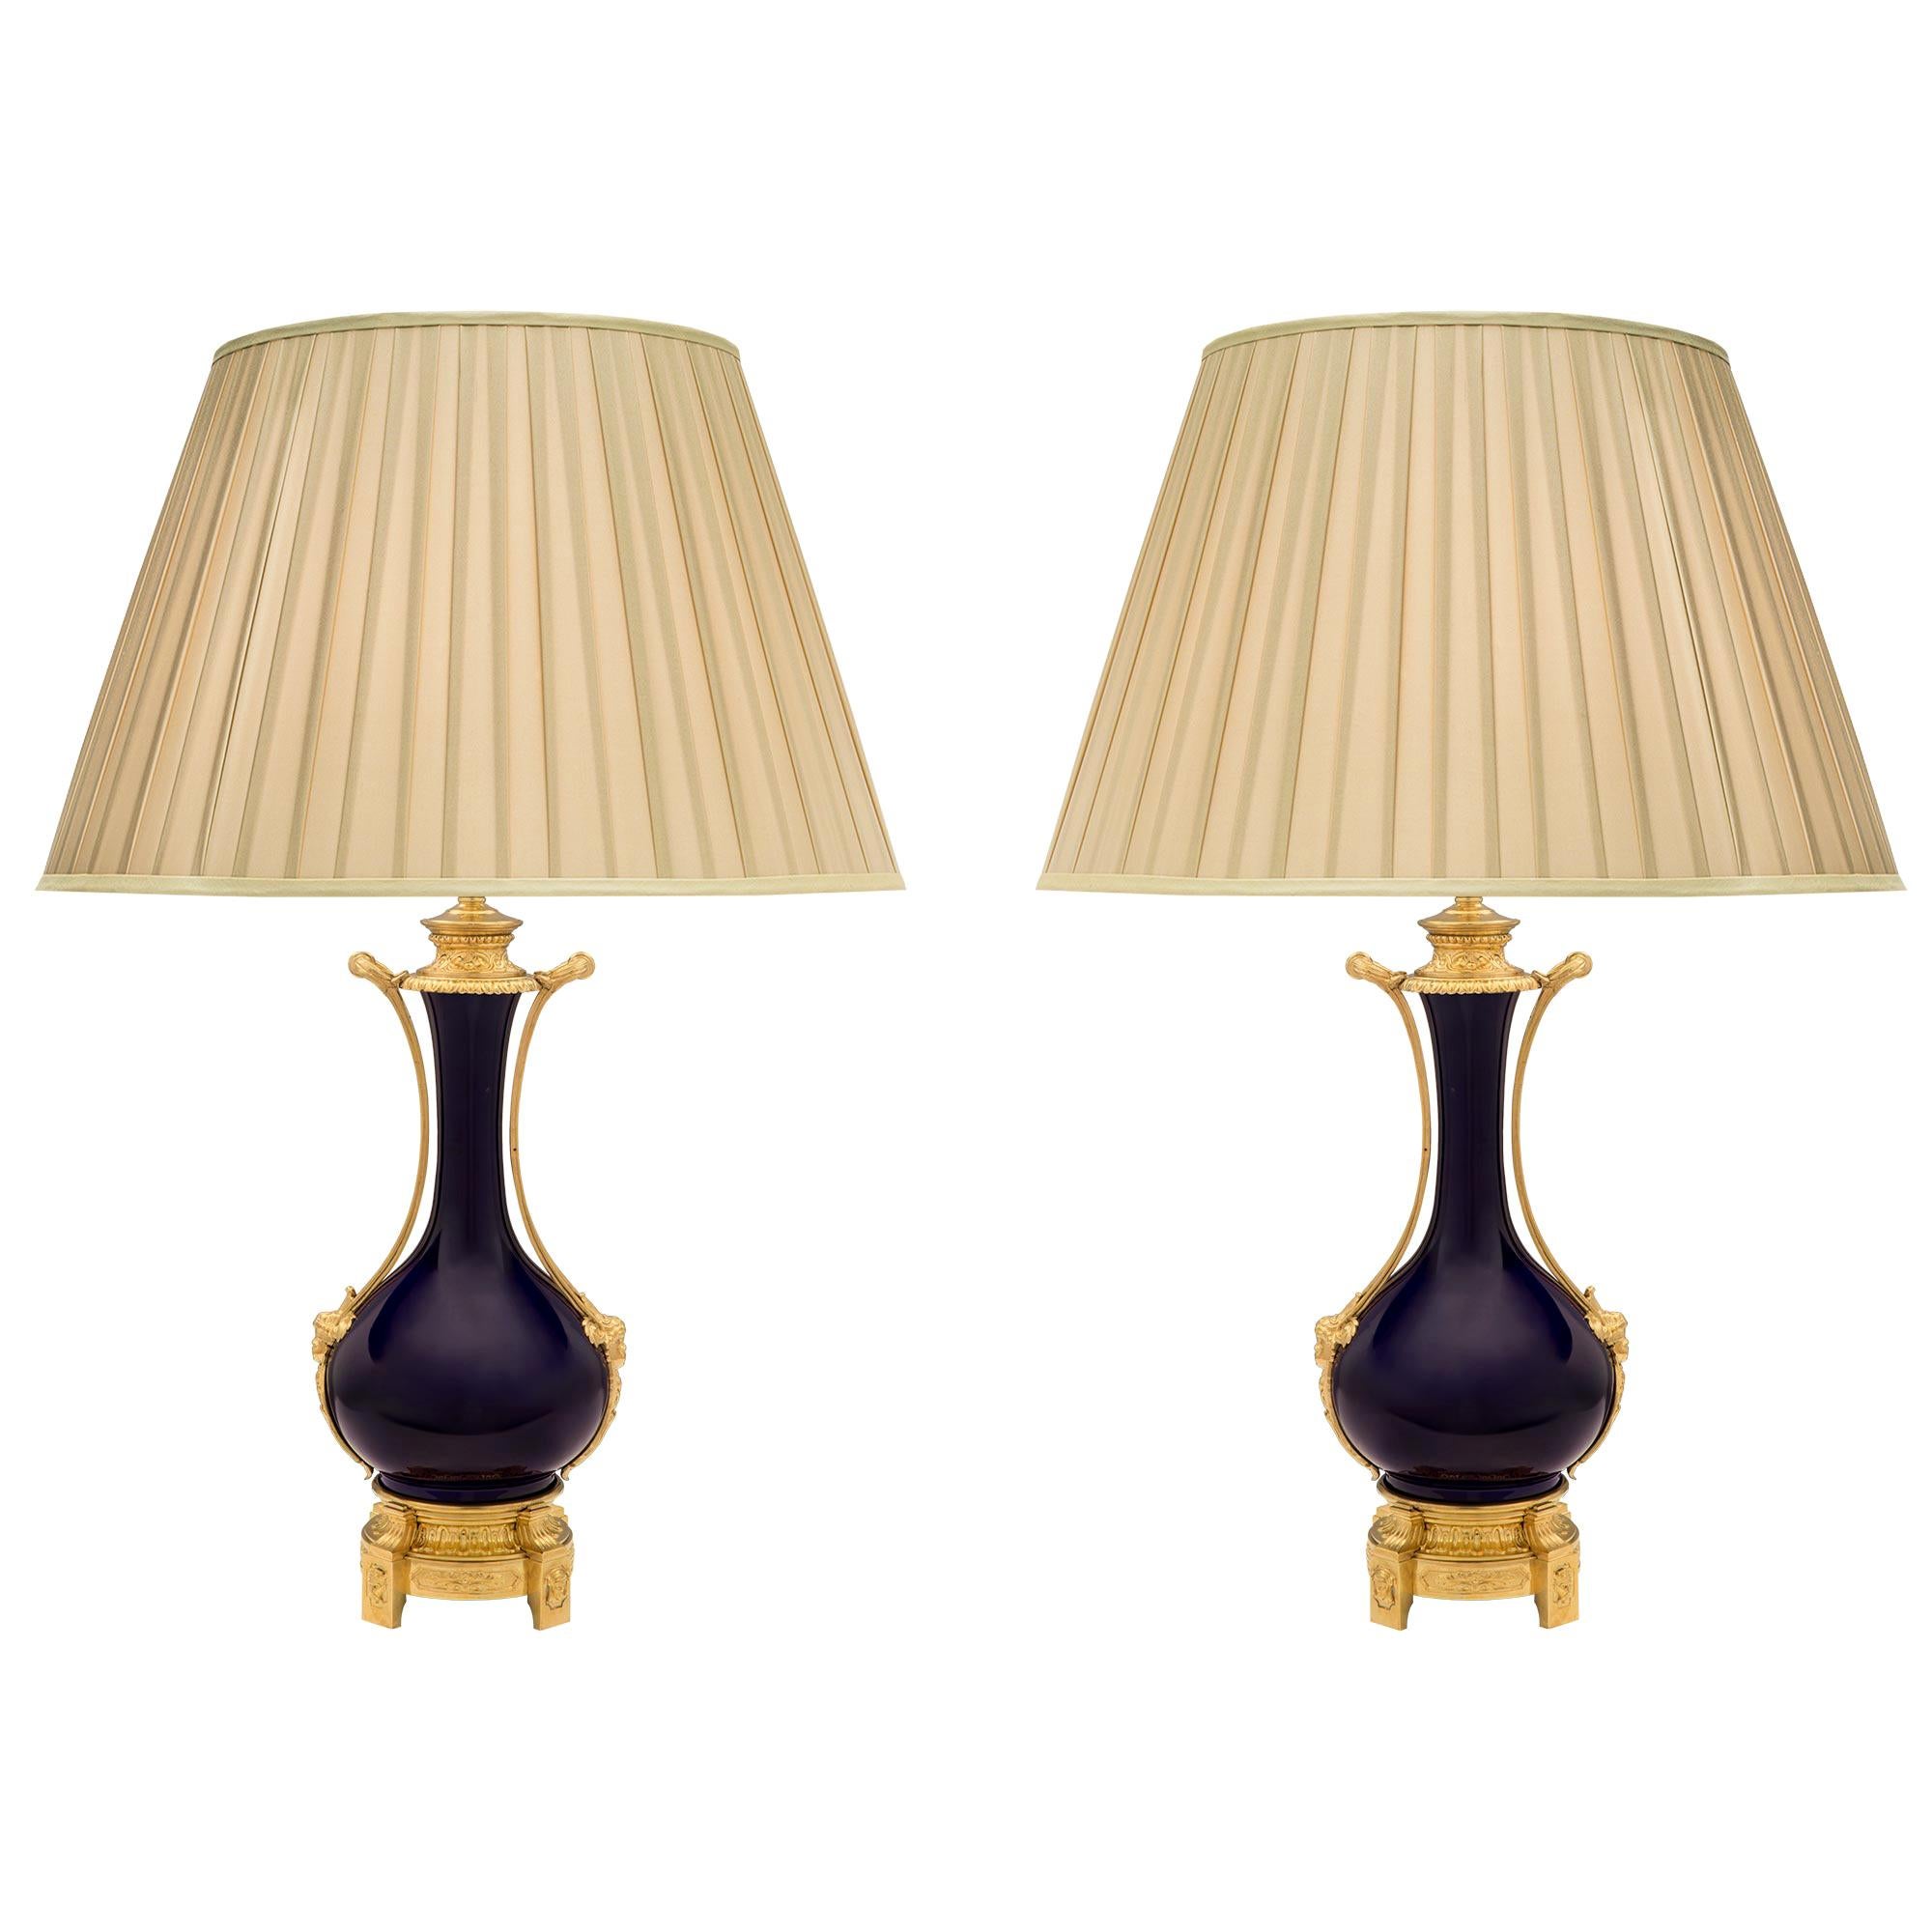 Pair of French 19th Century Louis XVI Style Ormolu and Sèvres Porcelain Lamps For Sale